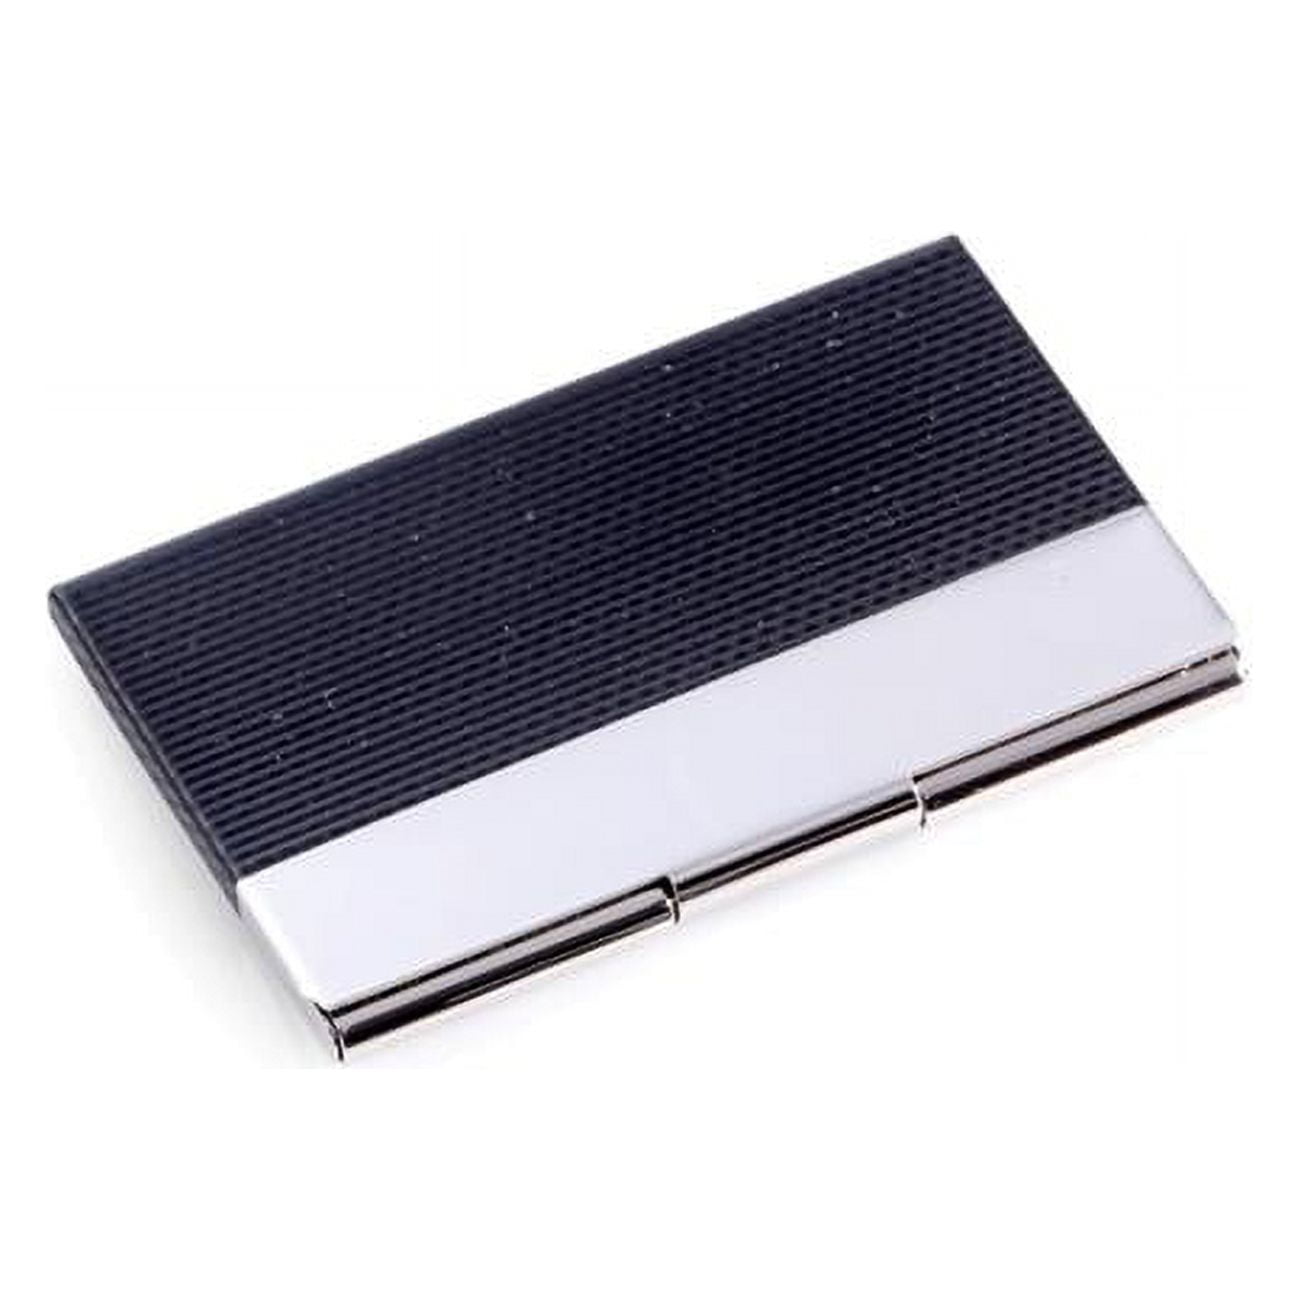 Bey-berk International D262s Silver Plated Business Card Case With Black Anodized Trim - Black